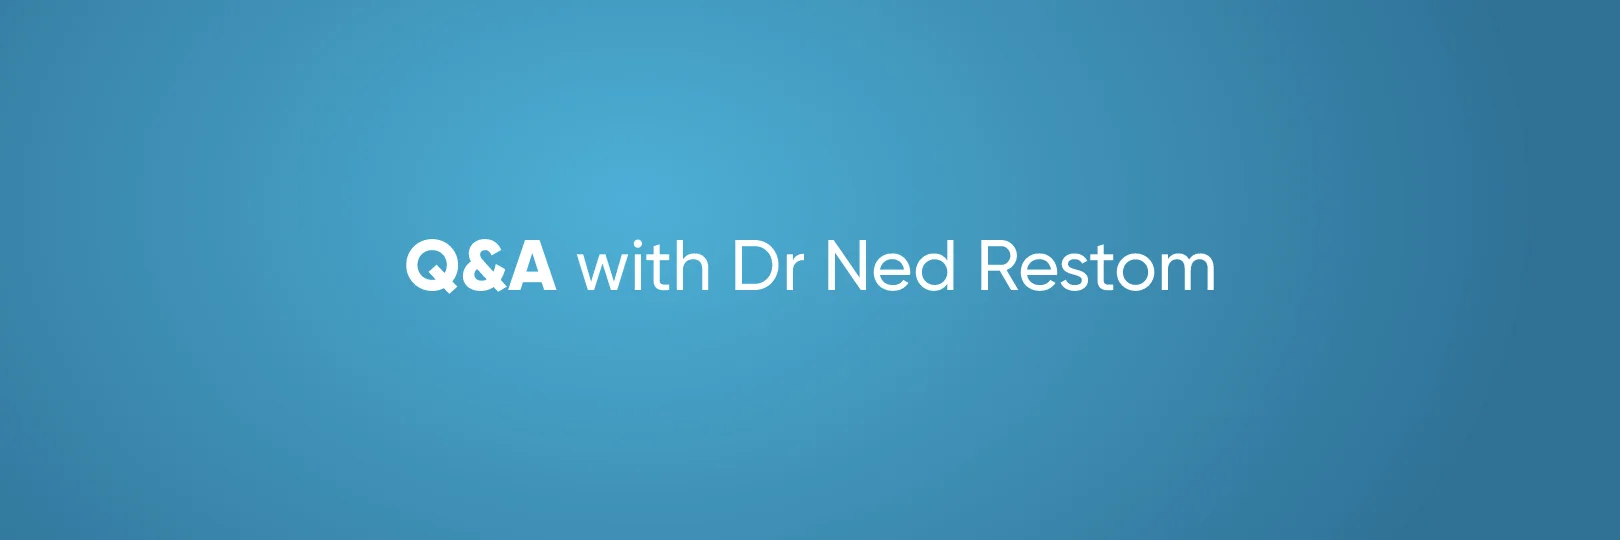 Q&A with Dr Ned Restom